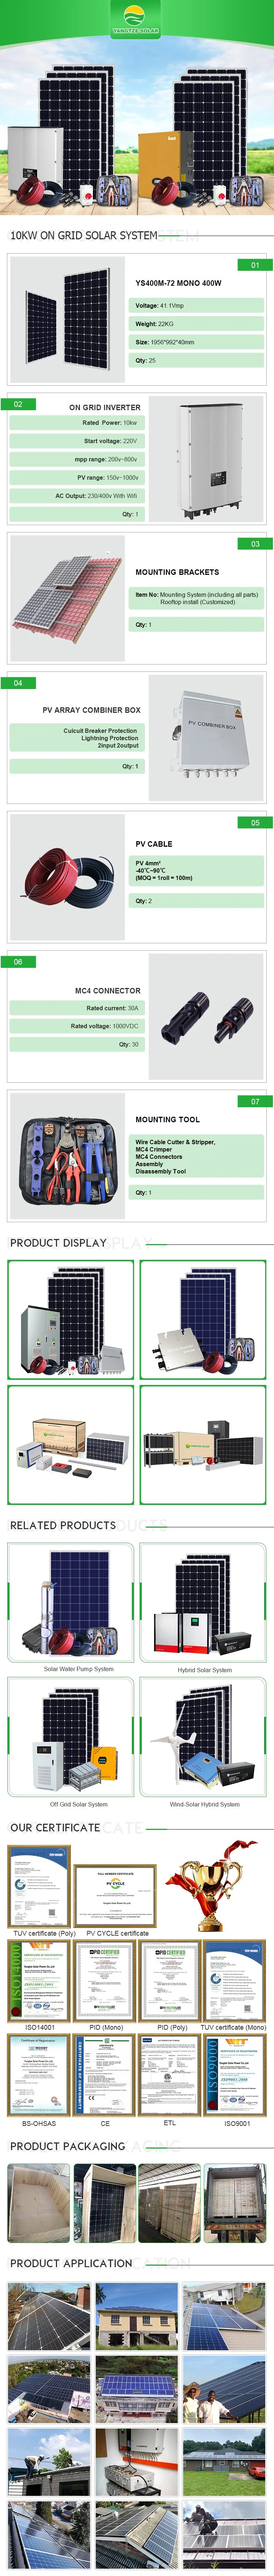 Yangtze 10 Kw Solar System Grid Tie Solar System Grid Connected Without Battery